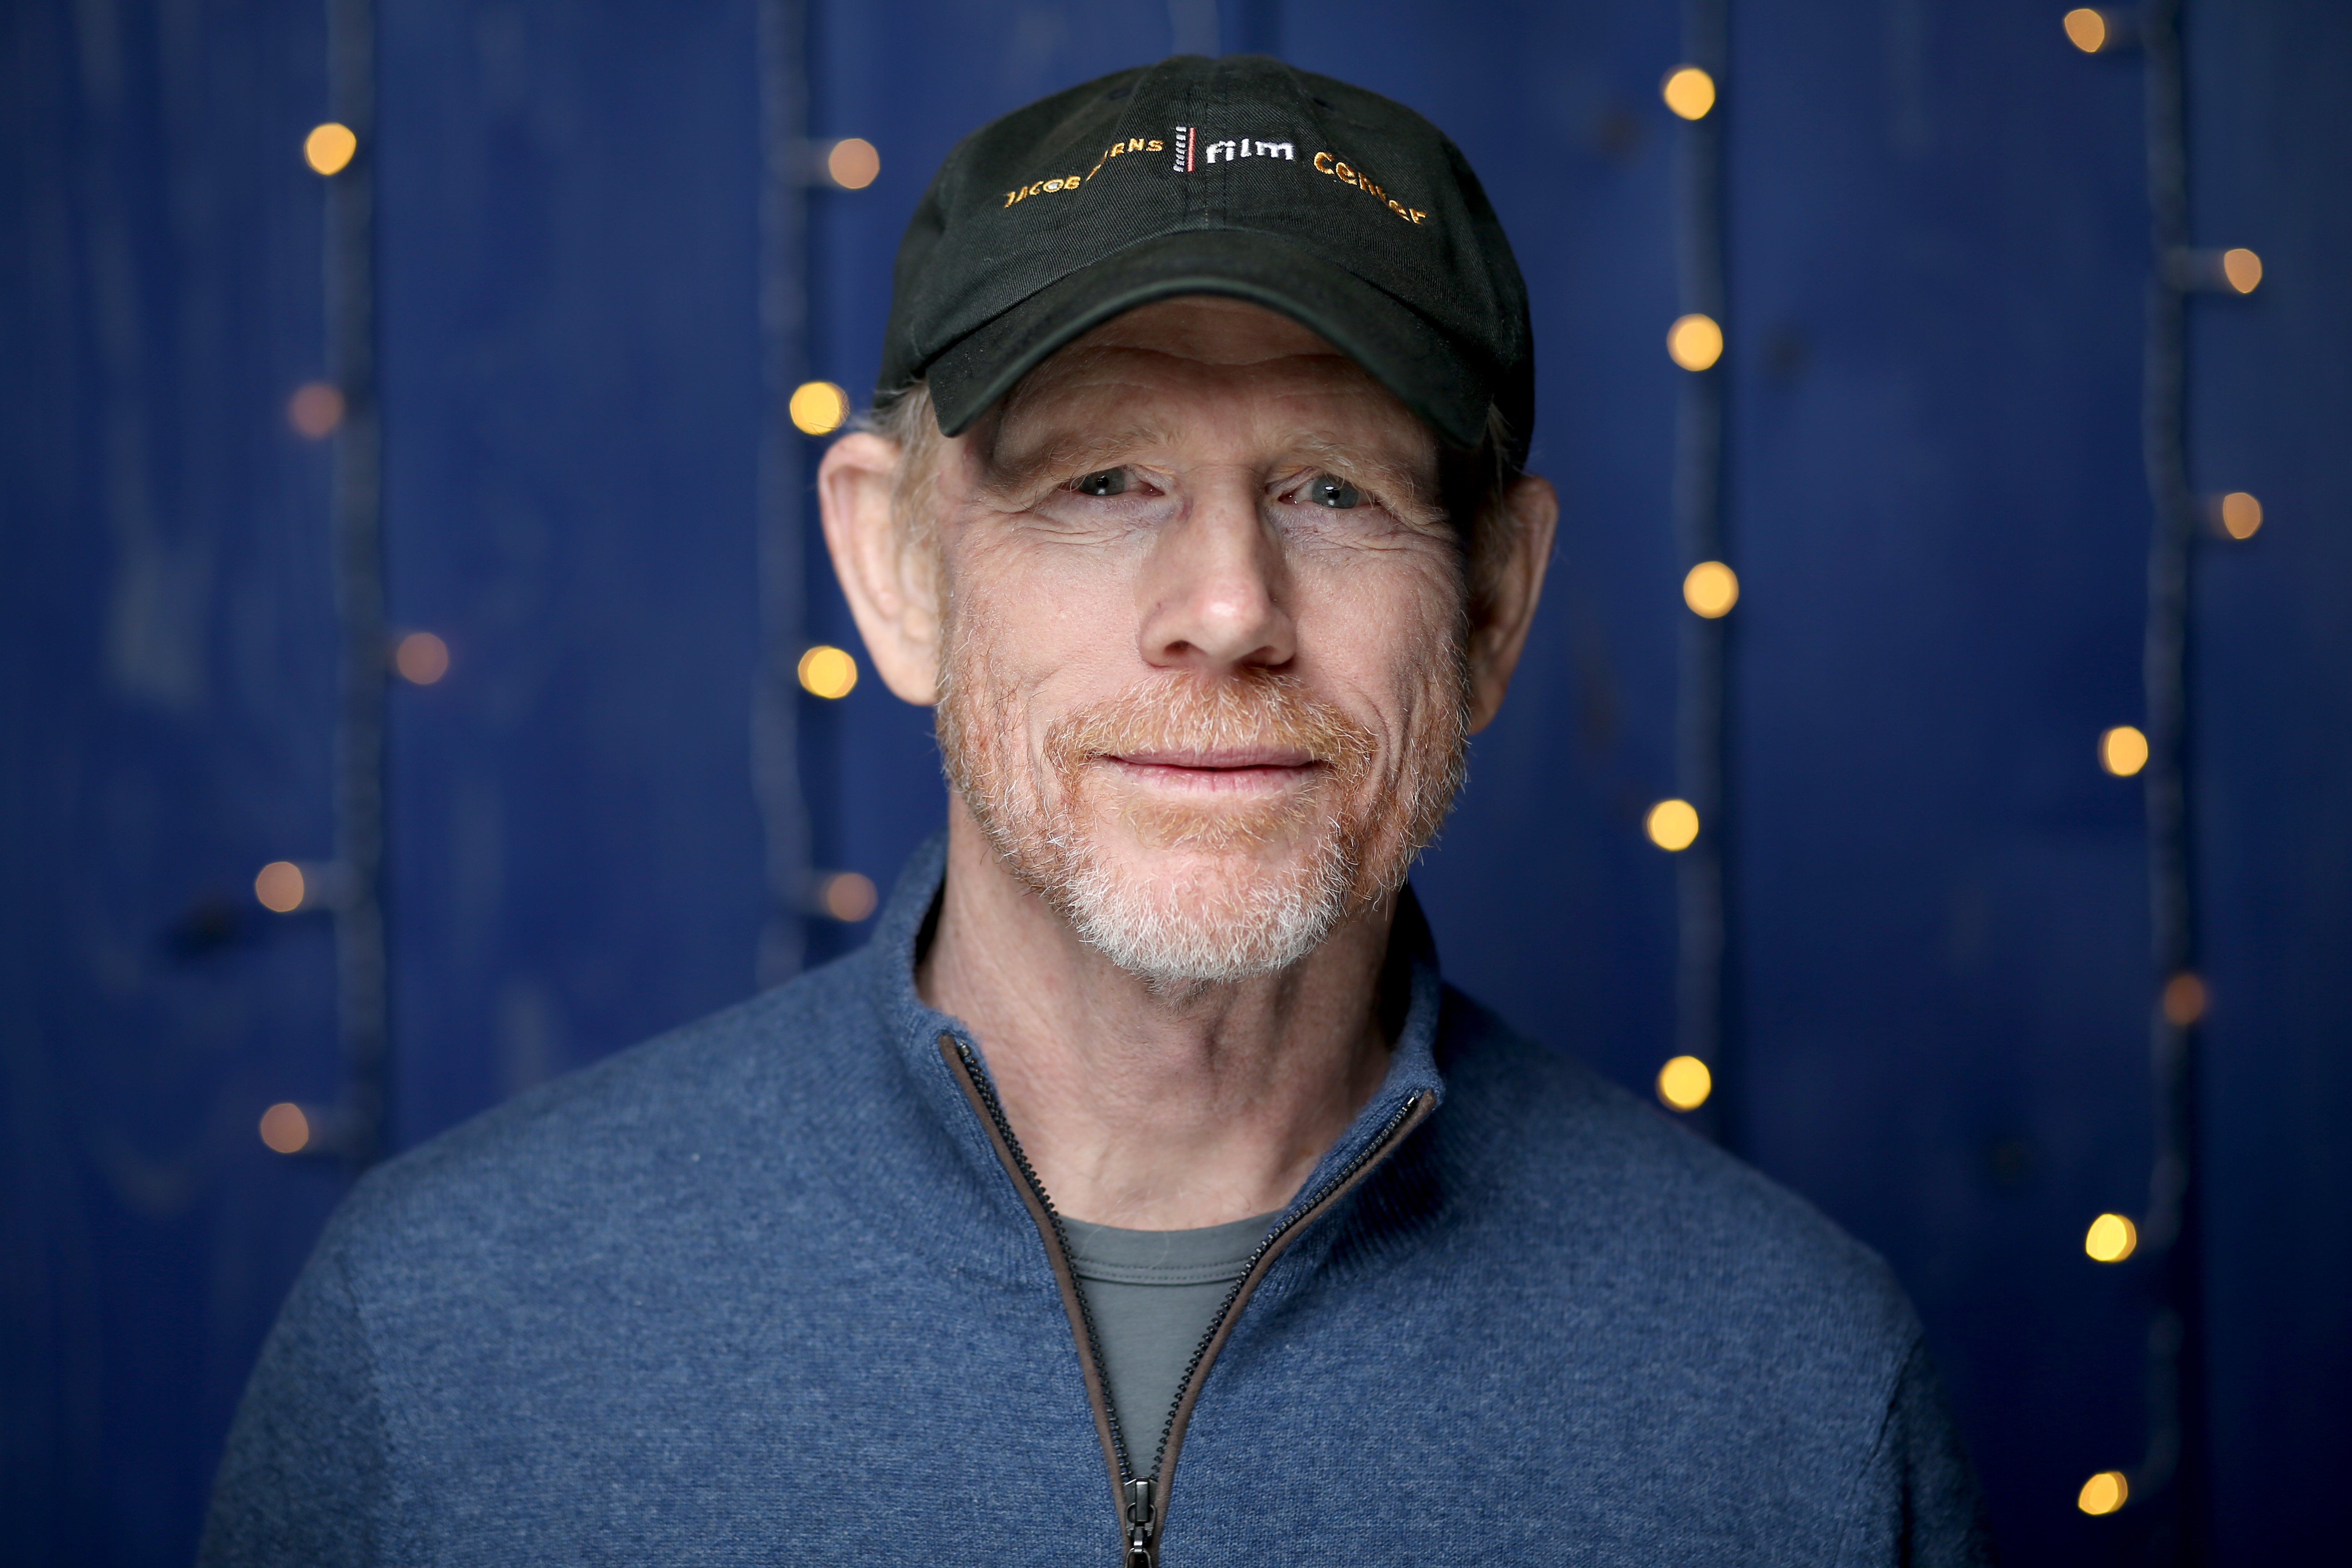 Filmmaker and actor Ron Howard poses for a photograph wearing a ballcap and blue zippered top.